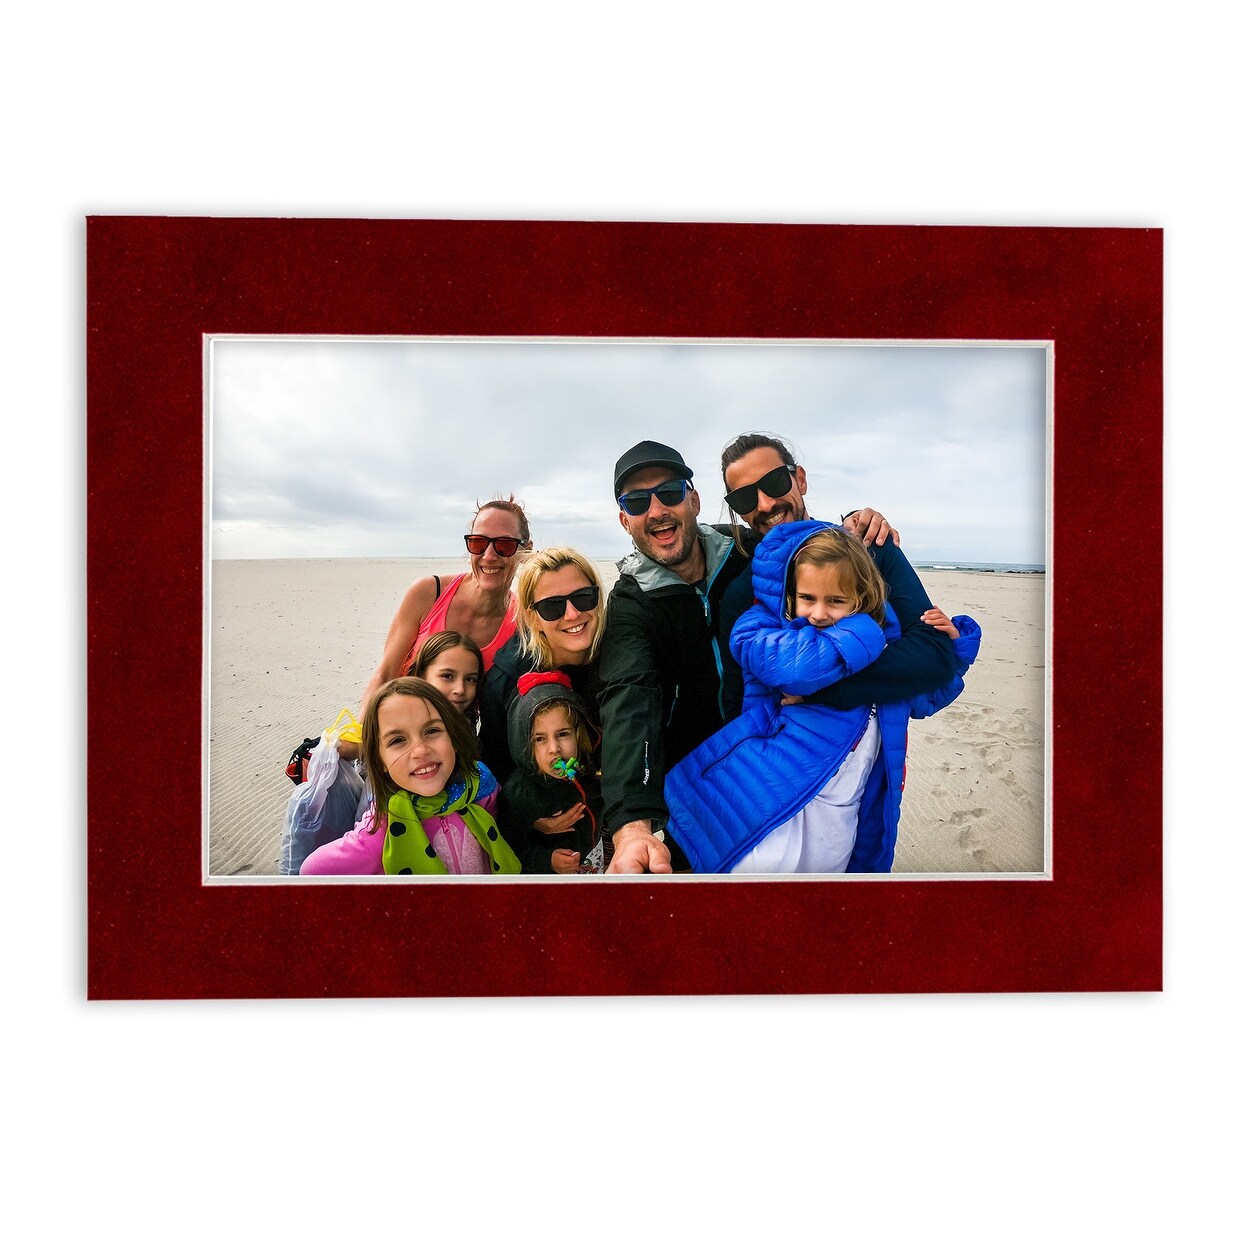 Pack of Ten 8x12 Mats Bevel Cut for 6x10 Photos - Acid Free Bright Red Suede Precut Matboards for Pictures, Photos, Framing